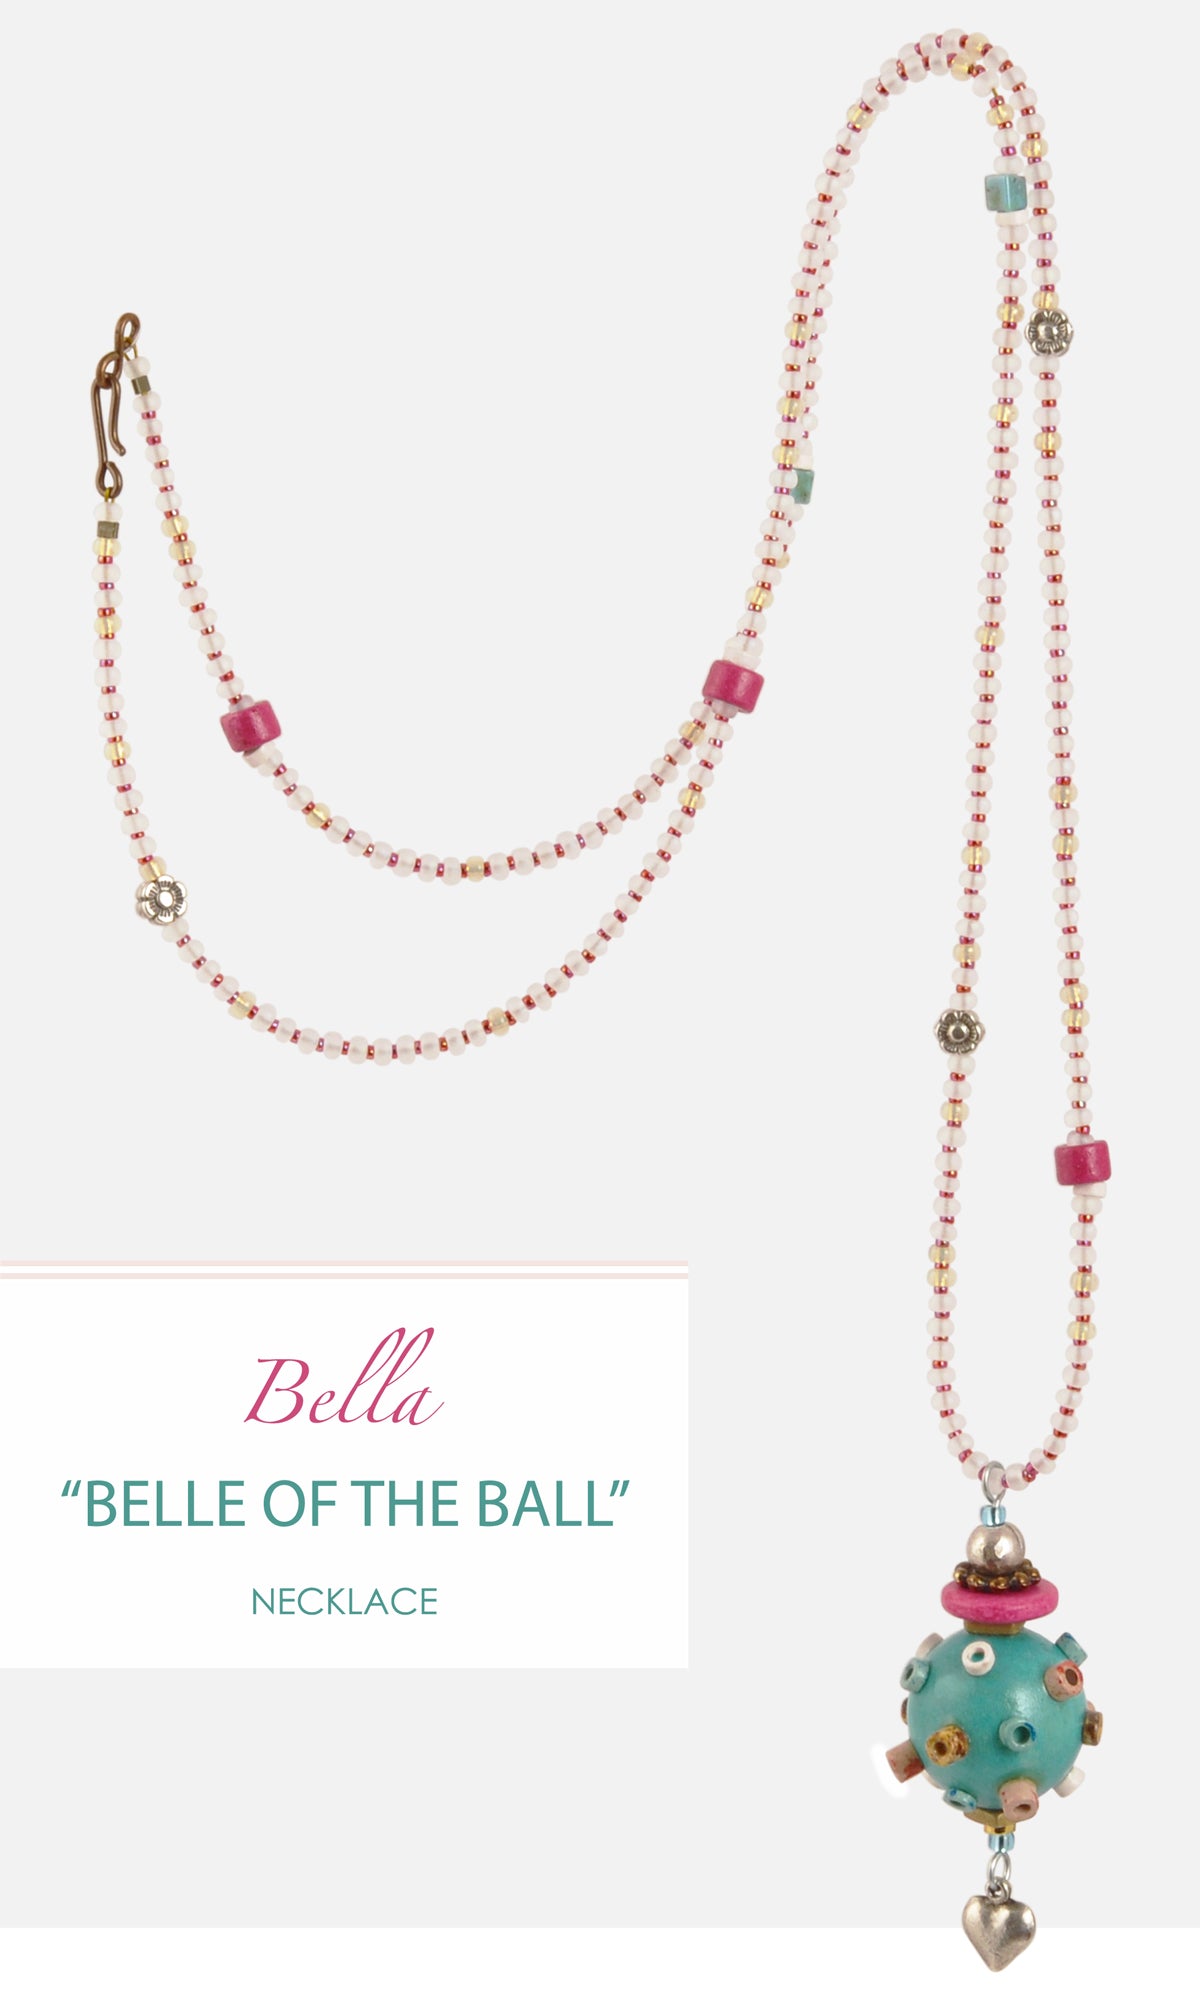 Belle of the Ball Necklace choiyeonhee